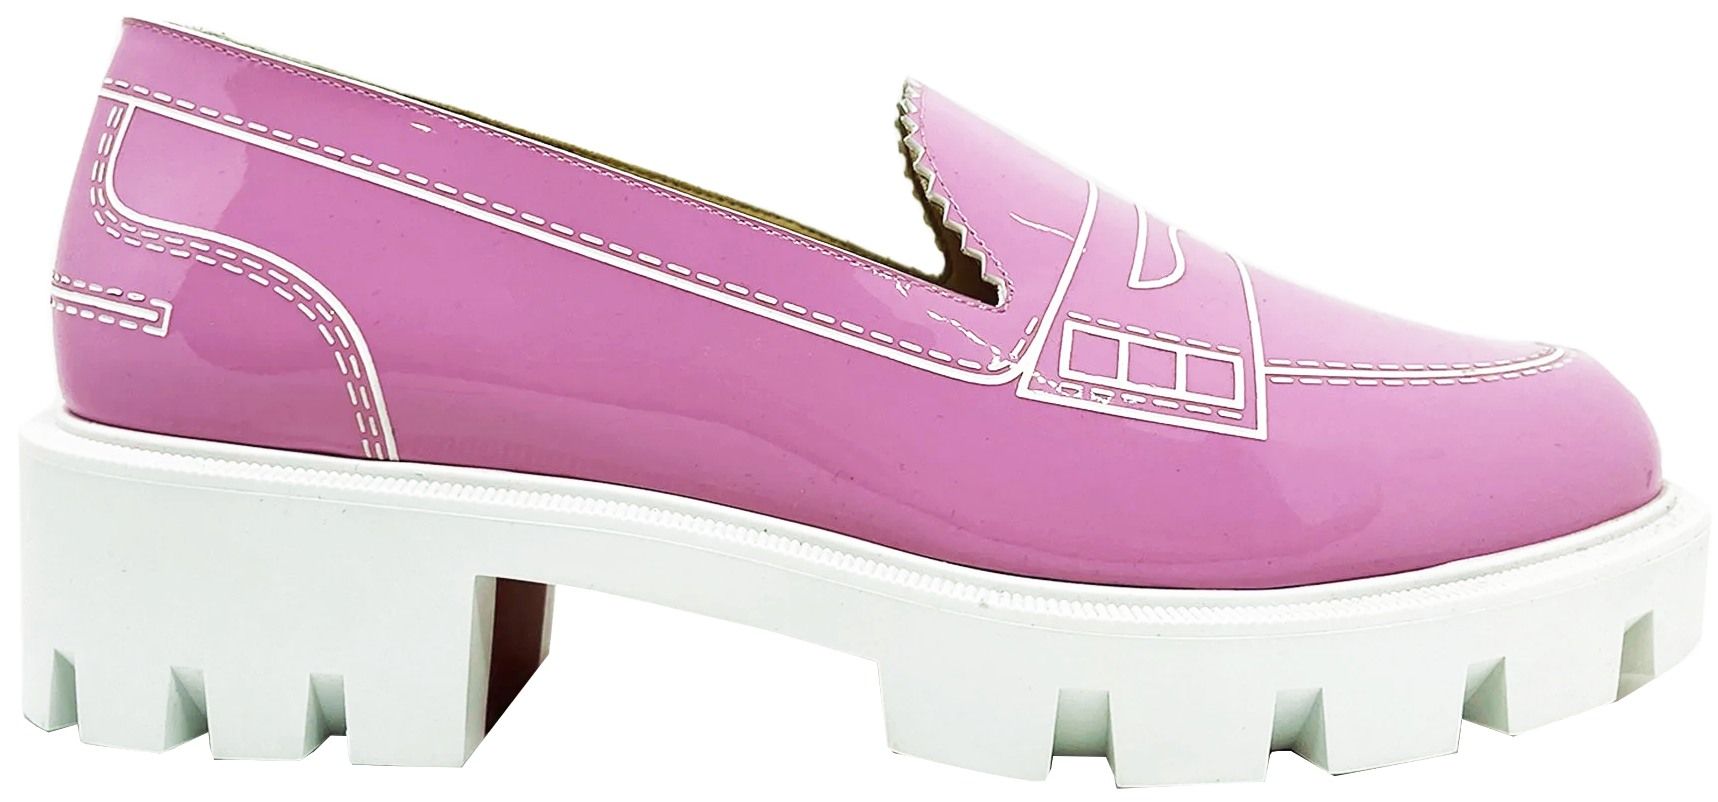 Mocalaureat Loafers (Pink Patent) | style